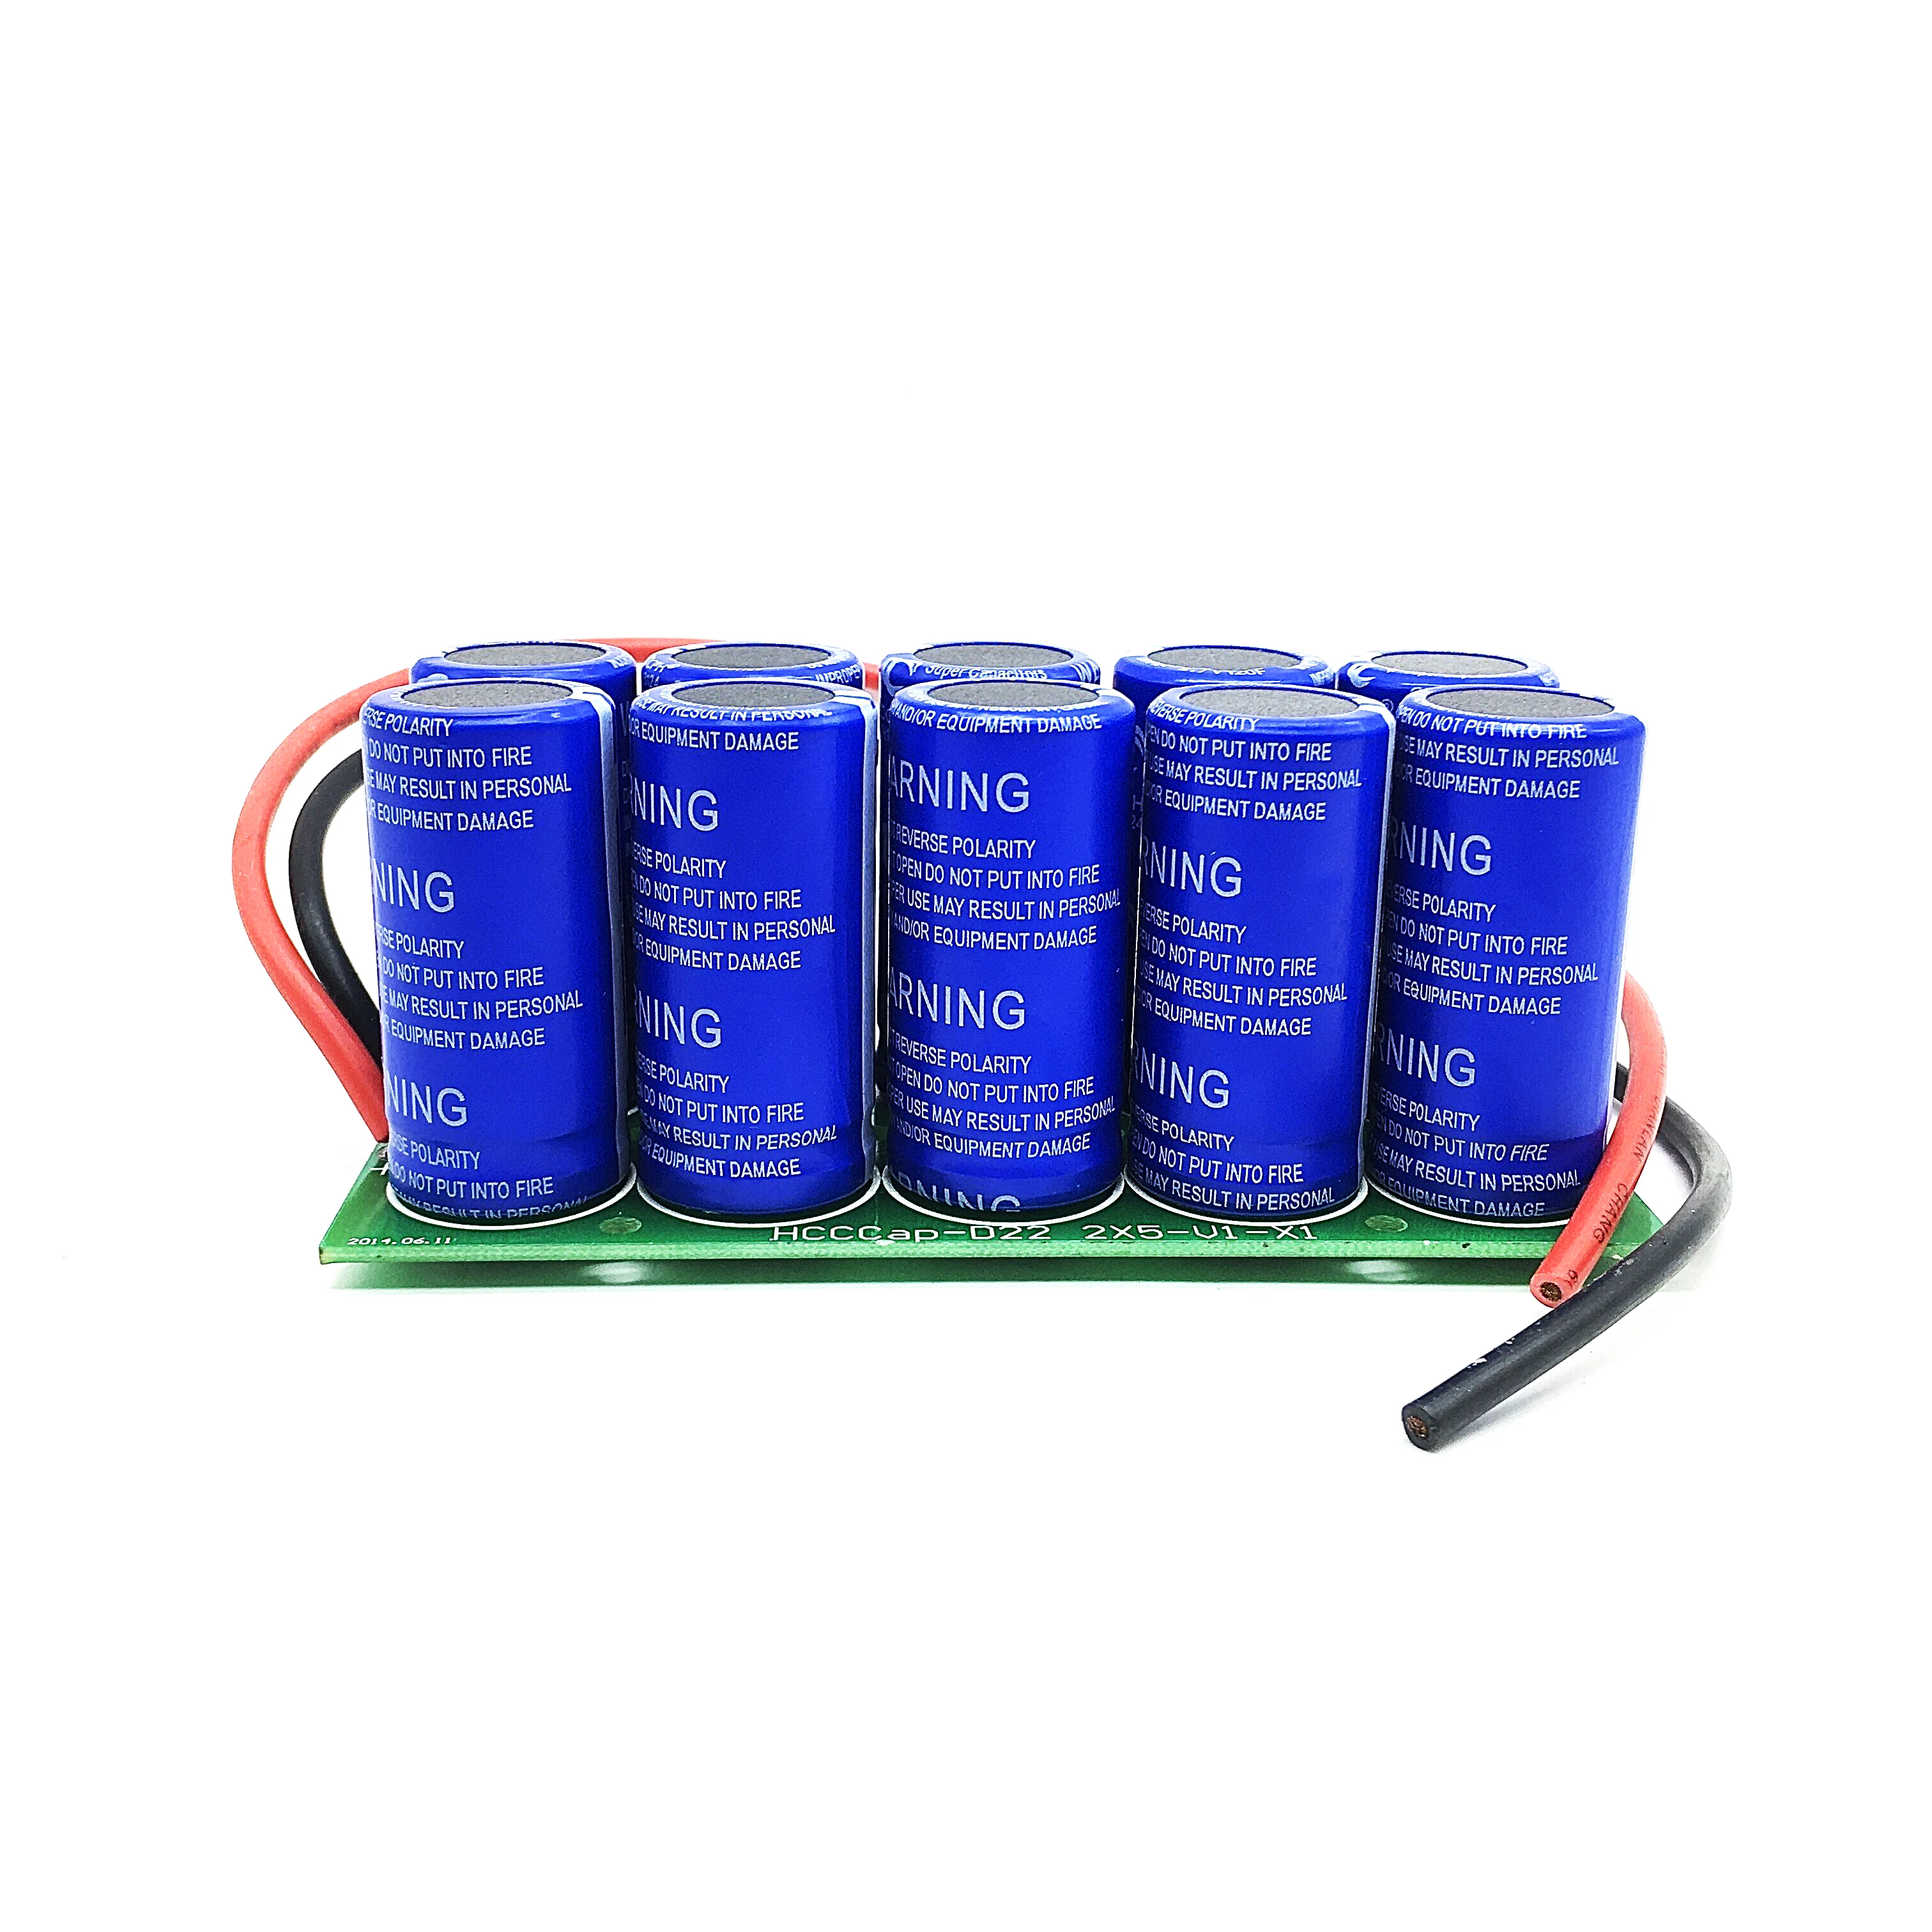 Super Capacitors Farad Capacitor Modules 27V 12F SuperCapacitors With Double Protection Board With Line UltraCapacitor elecrow gprs gsm sim800c shield for arduino sim800c module with antenna sim900 gsm gprs pcba development board diy kit modules